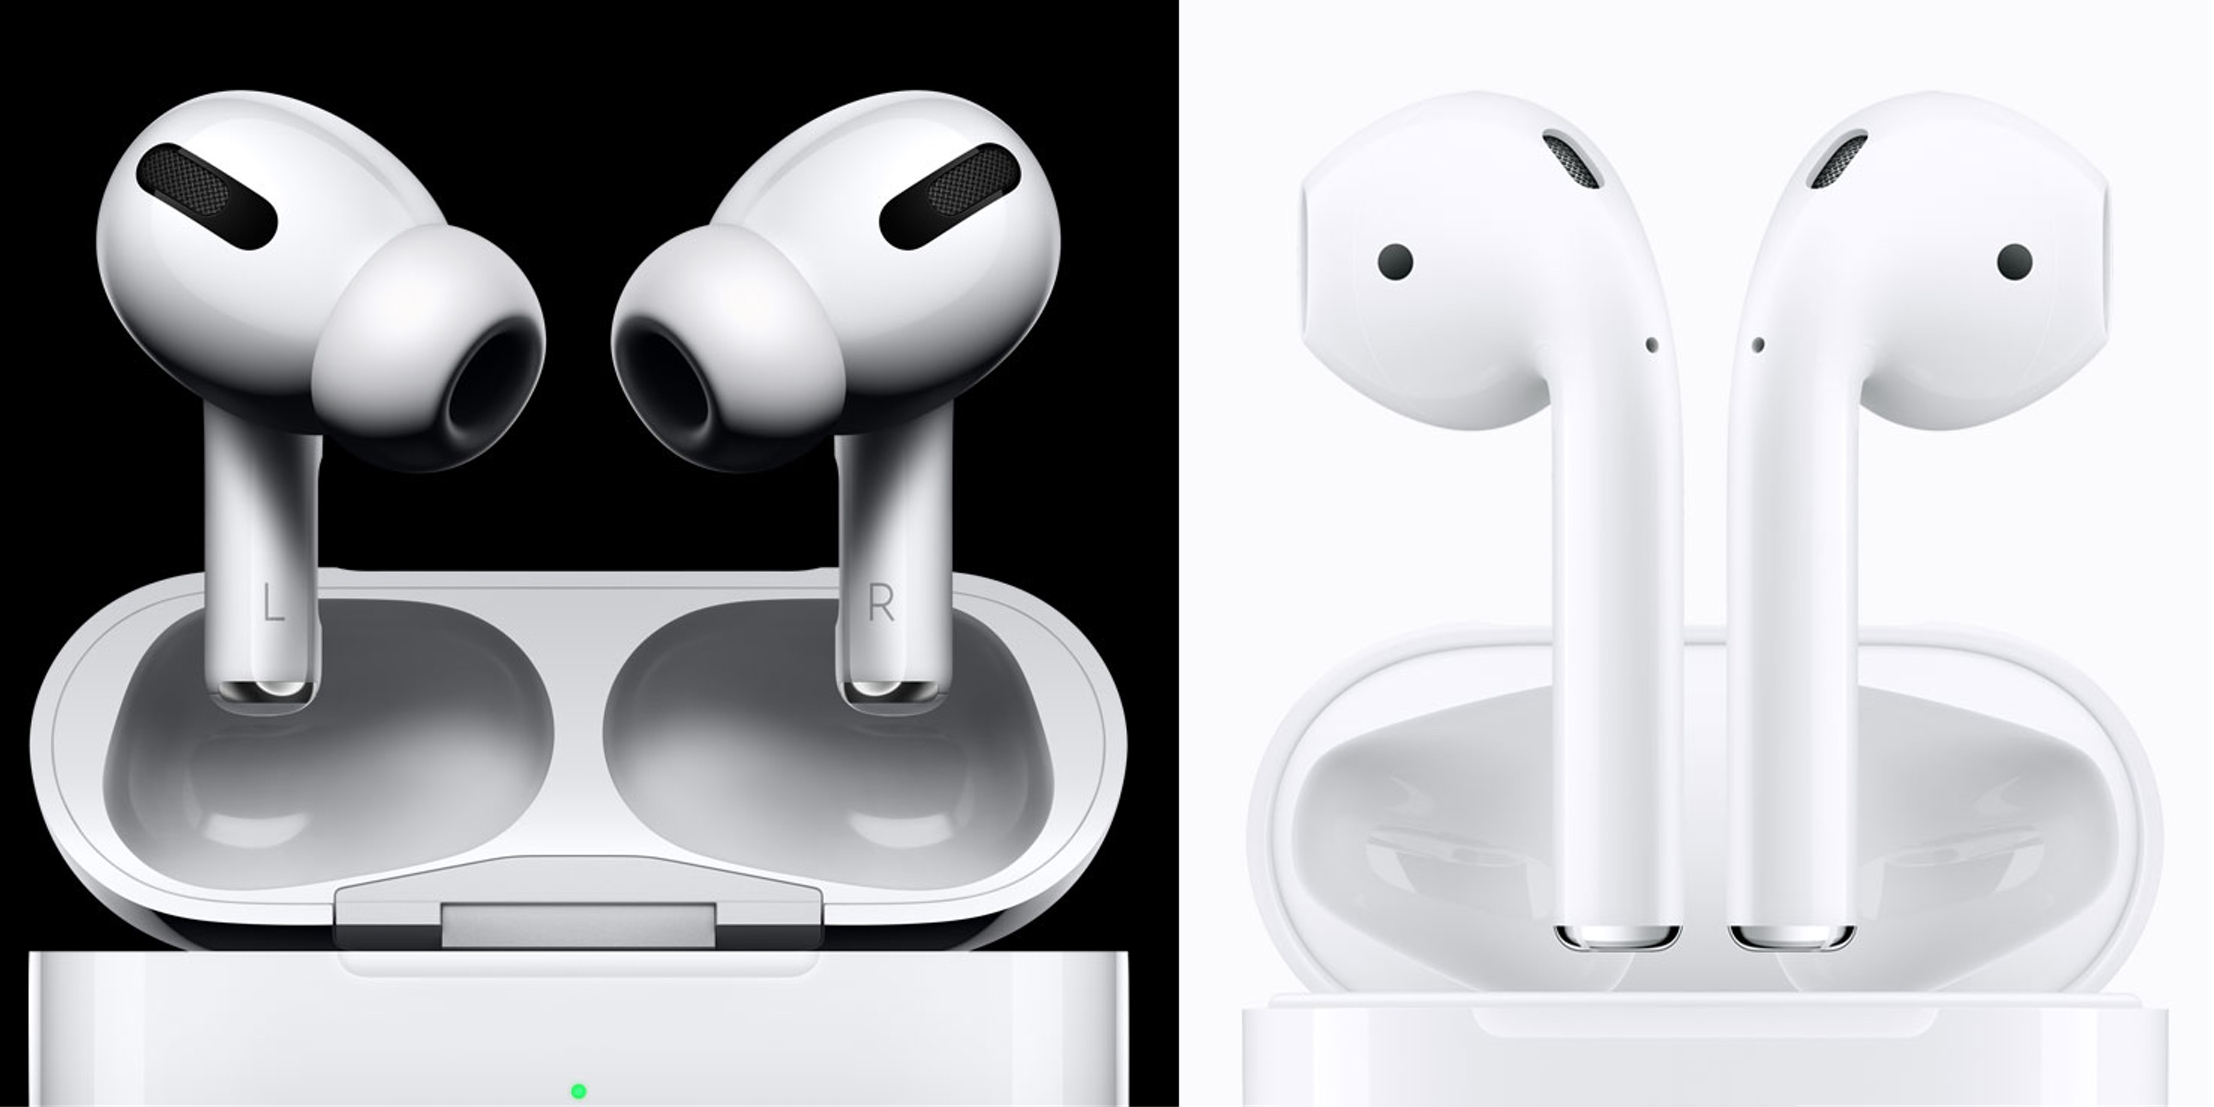 Analyst estimates Apple sold 3 million AirPods over Black Friday 